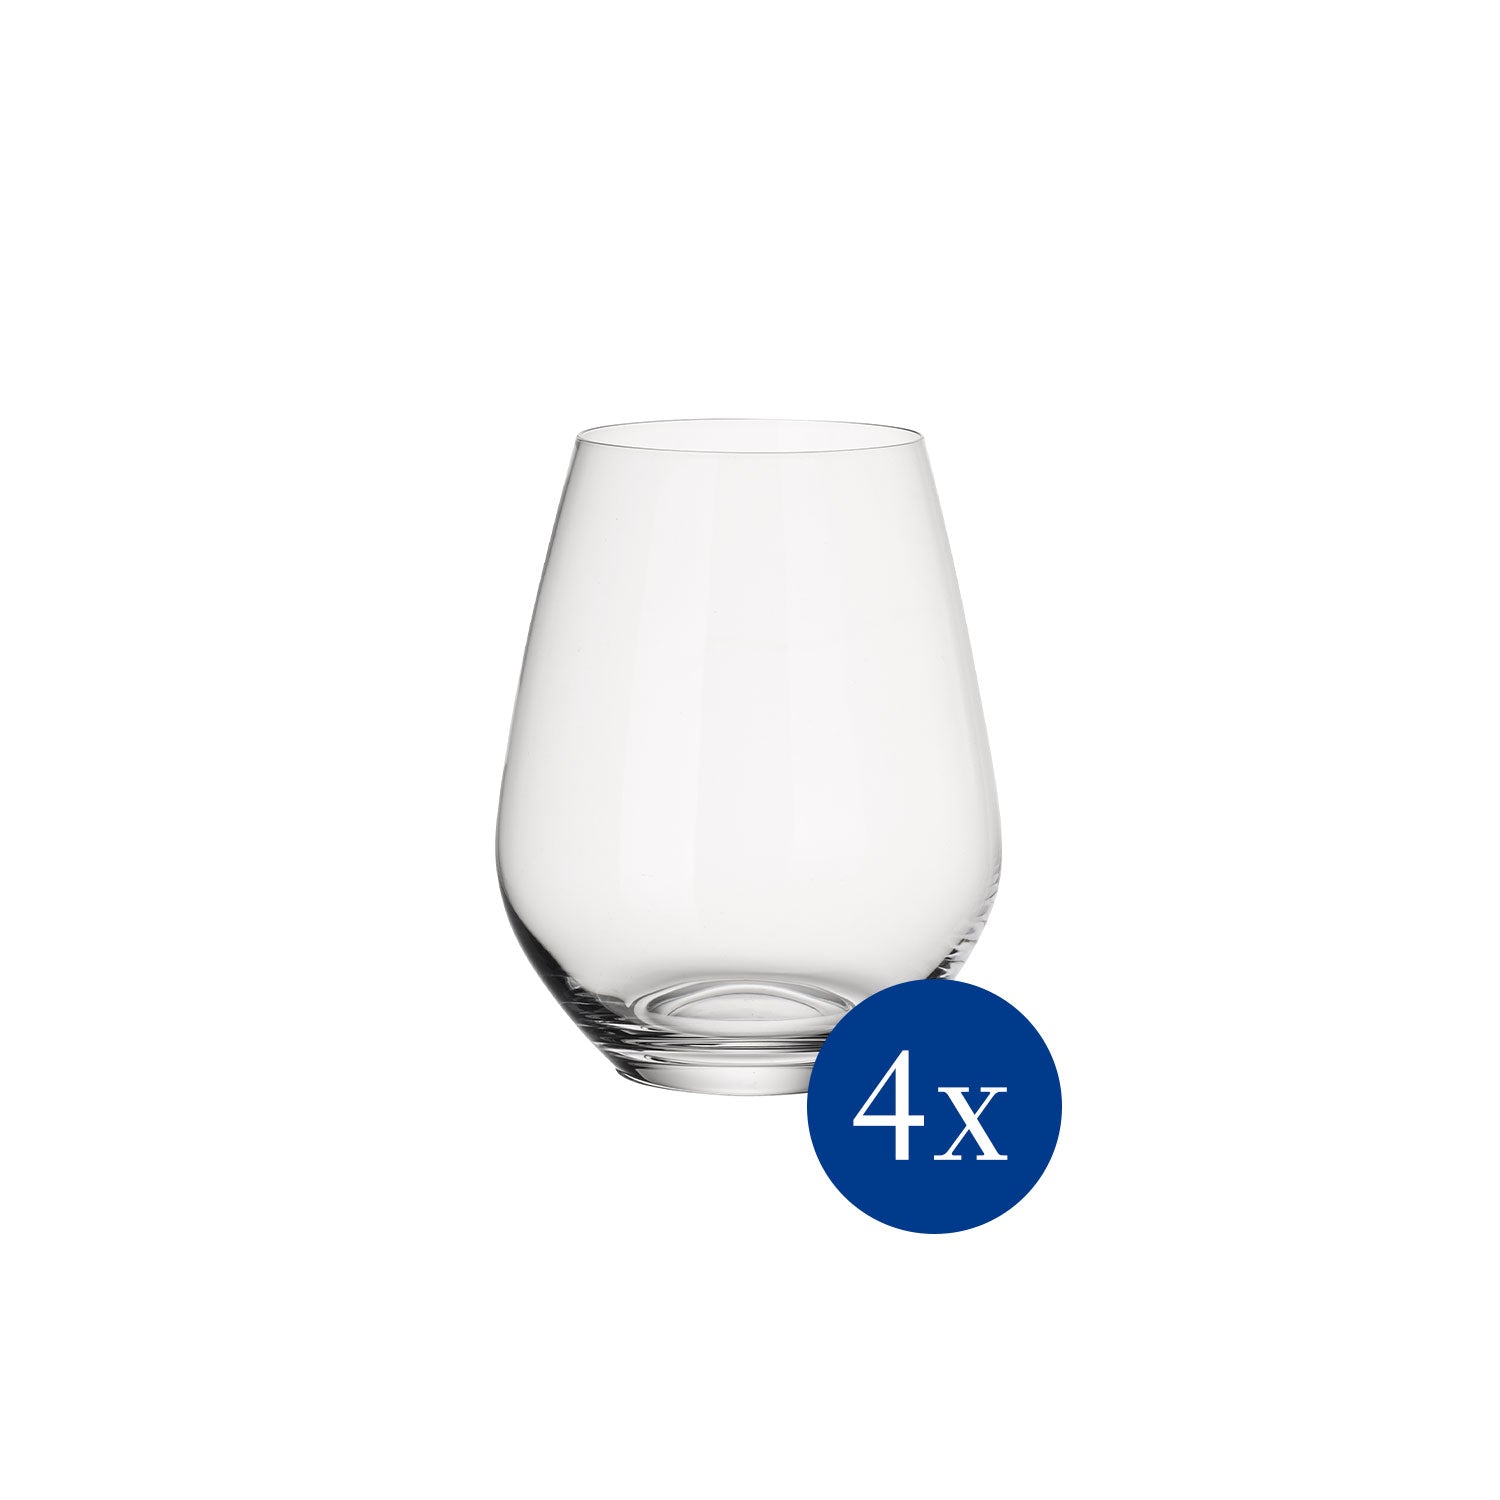 Ovid Water Glass, Set Of 4